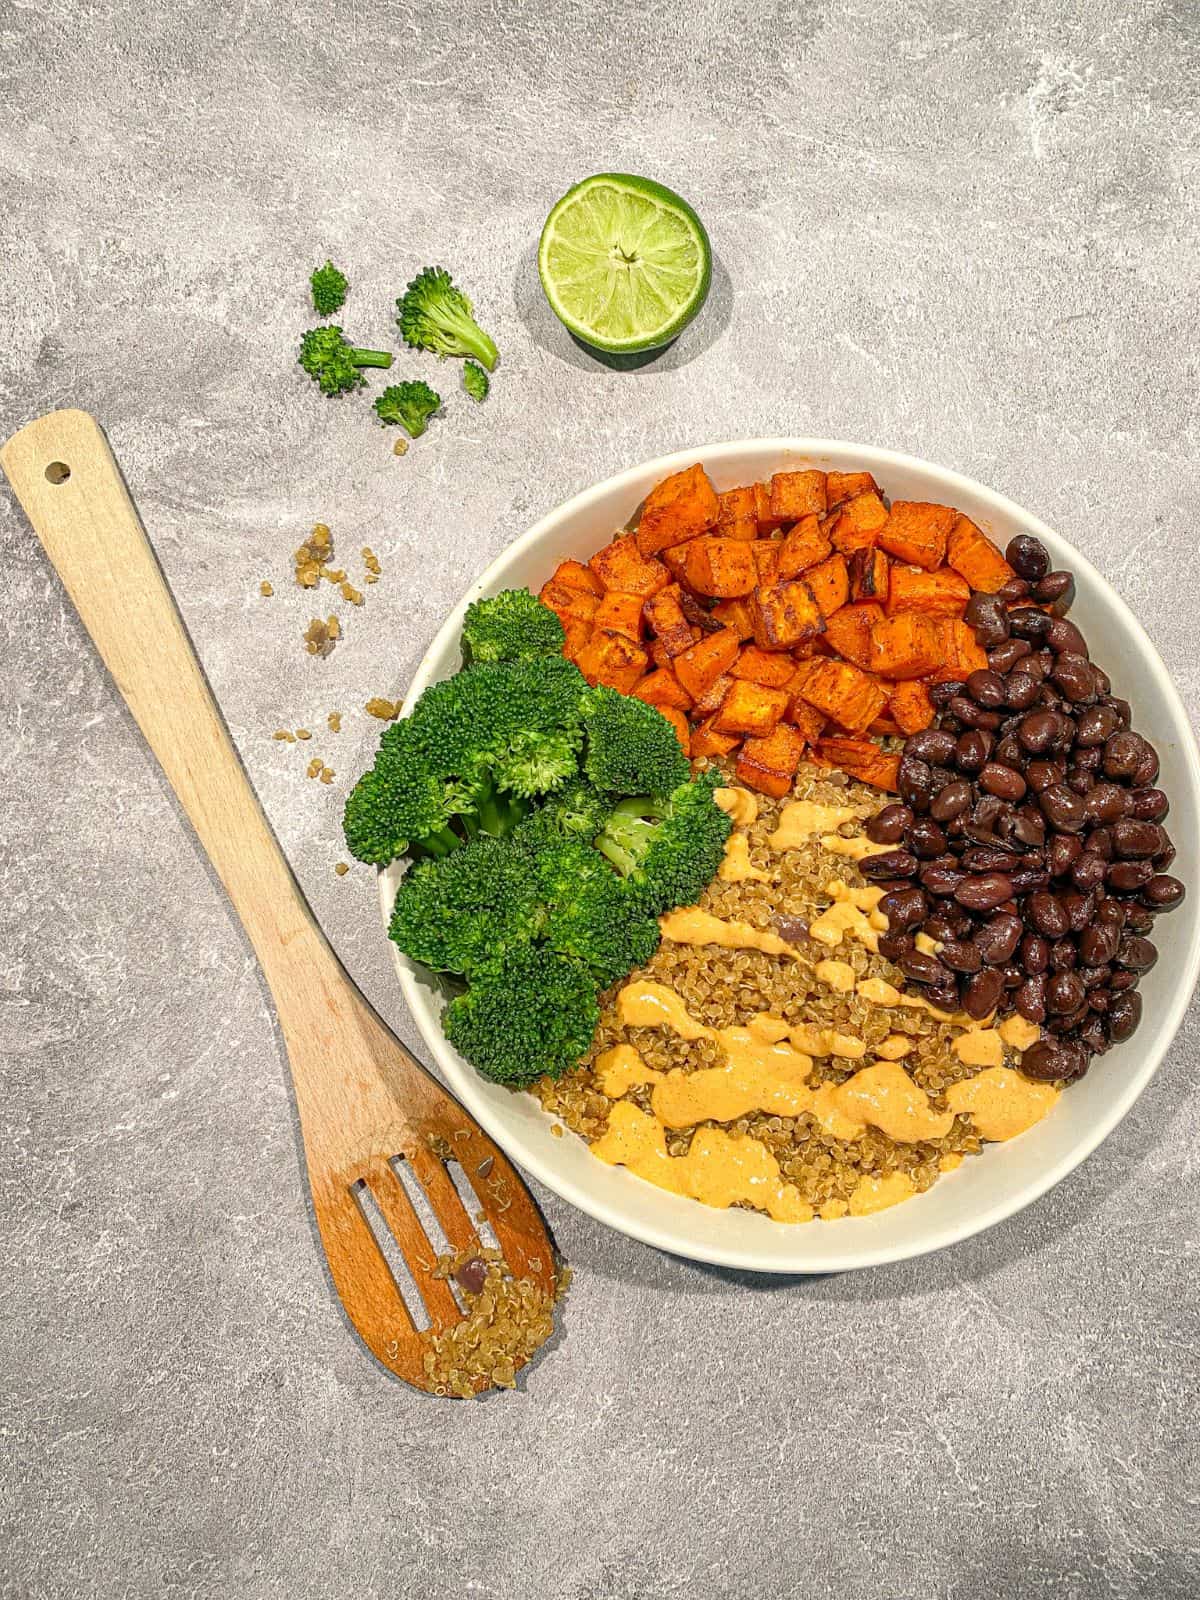 Vegan Taco Bowl with Cashew Sauce topped with black beans, sweet potatoes, and broccoli.